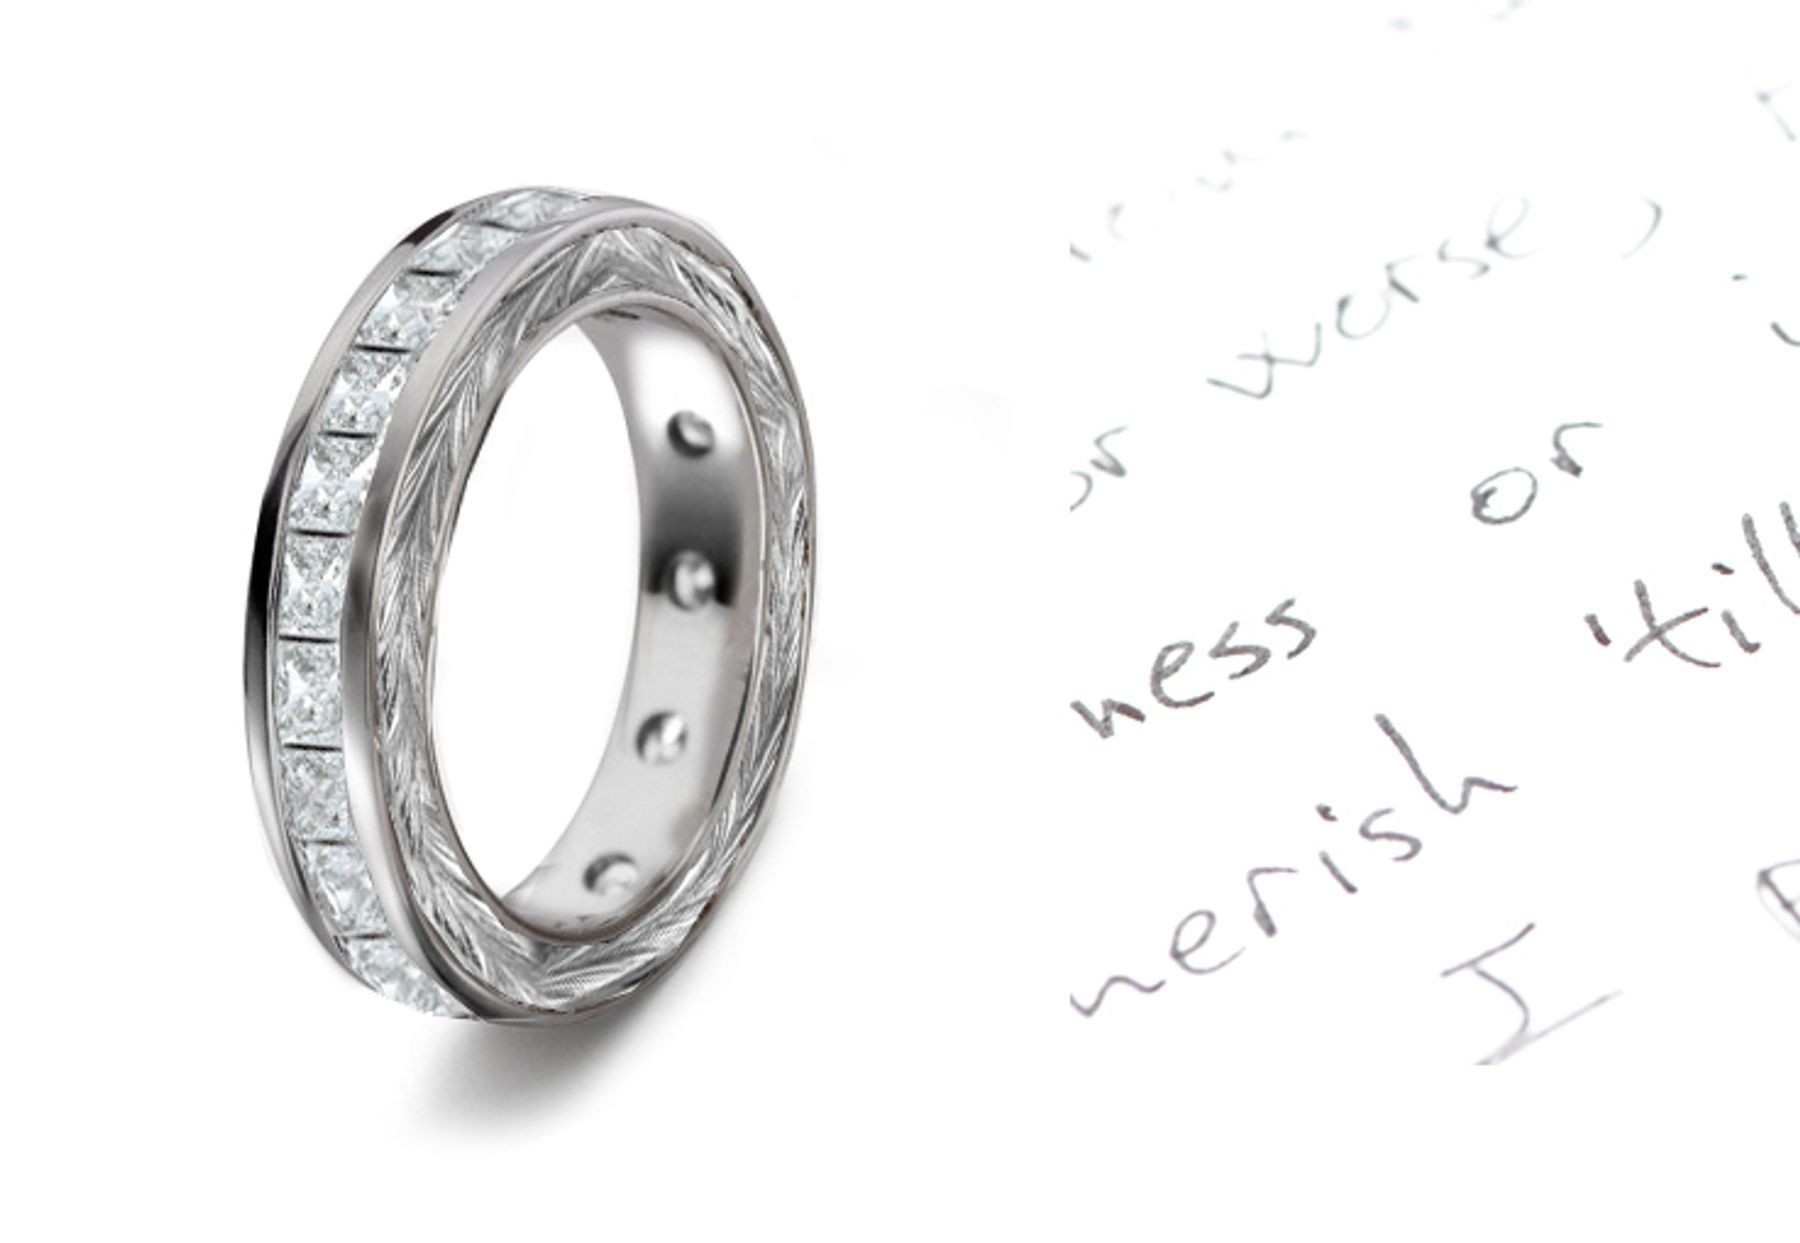 Tailored Design: Awe The Moment Vintage Style Princess-Cut Diamond Wedding Band in Platinum